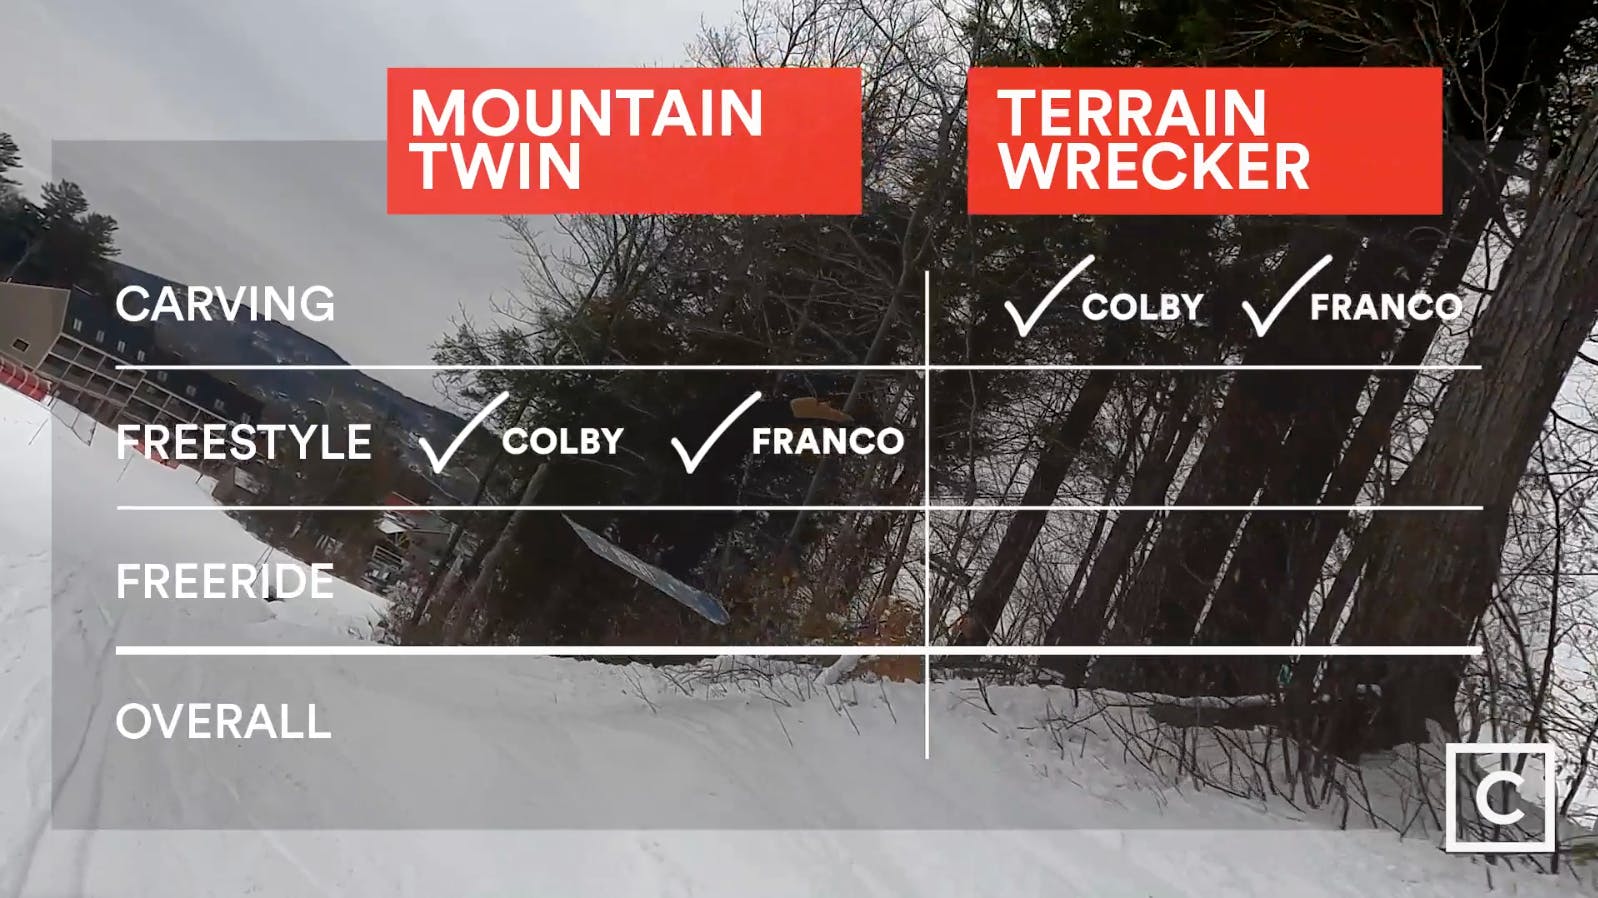 Leaderboard - both Colby and Franco prefer the Jones Mountain Twin snowboard for freestyle riding